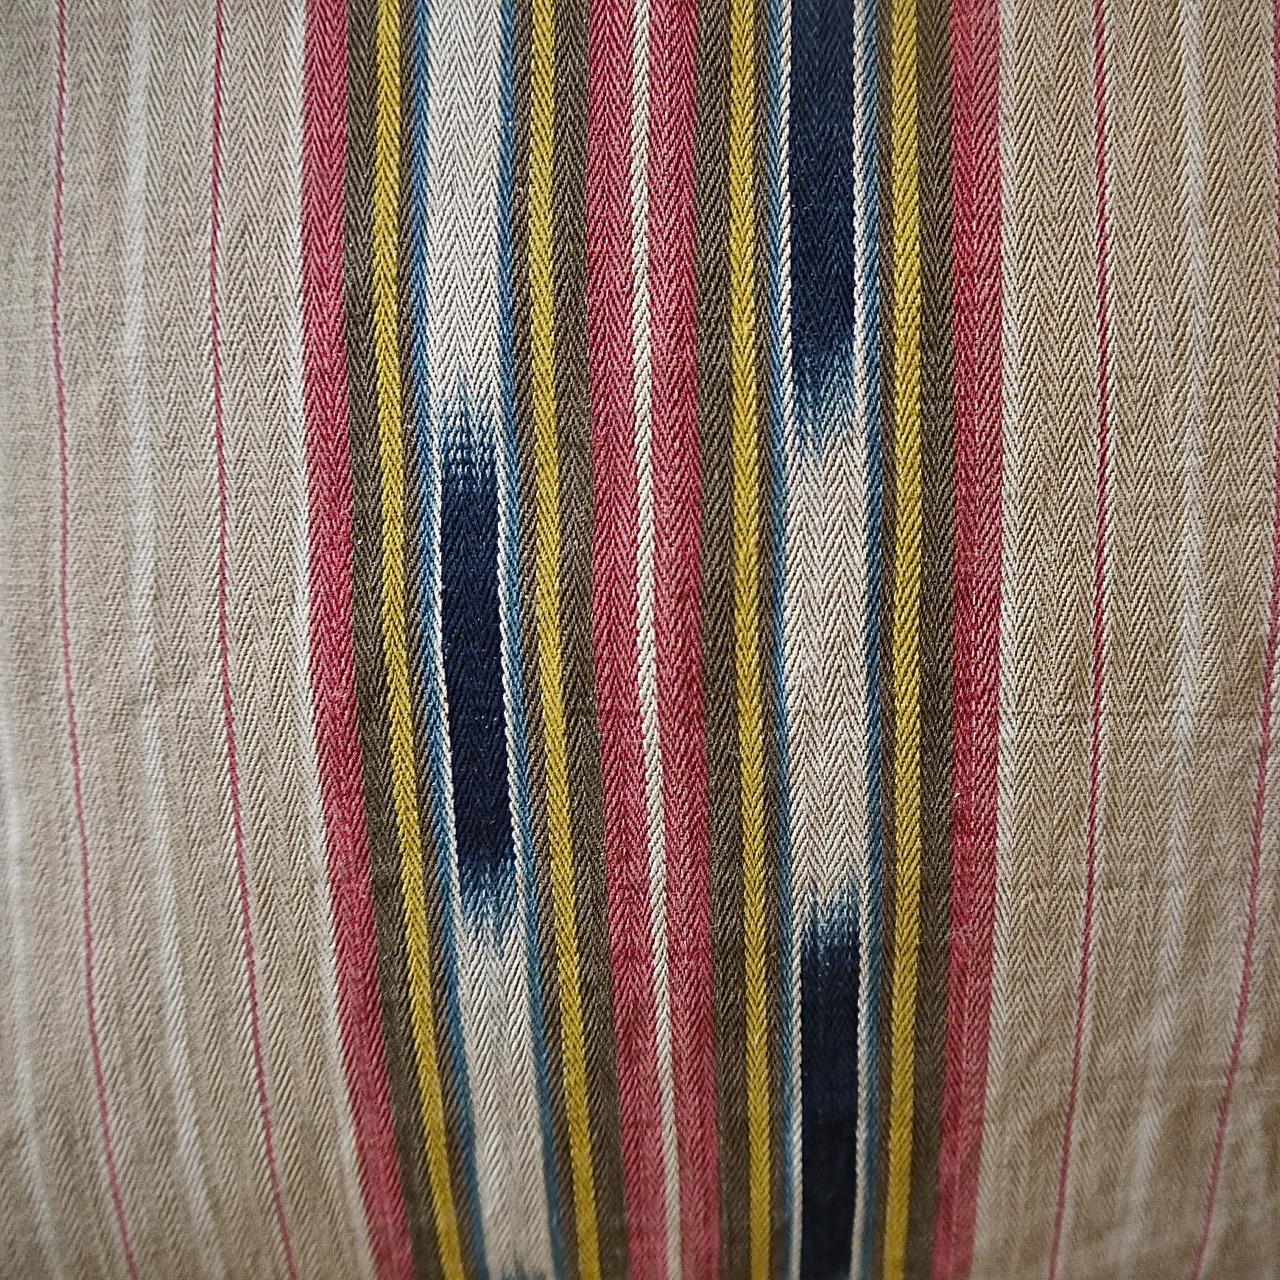 French late 19th century unusual striped ticking linen cushion with an unusual indigo Ikat detail in the stripe. Stripes of lightly faded beige, red and yellow with indigo Ikat floating in between. Self-backed and slip-stitched closed with a duck